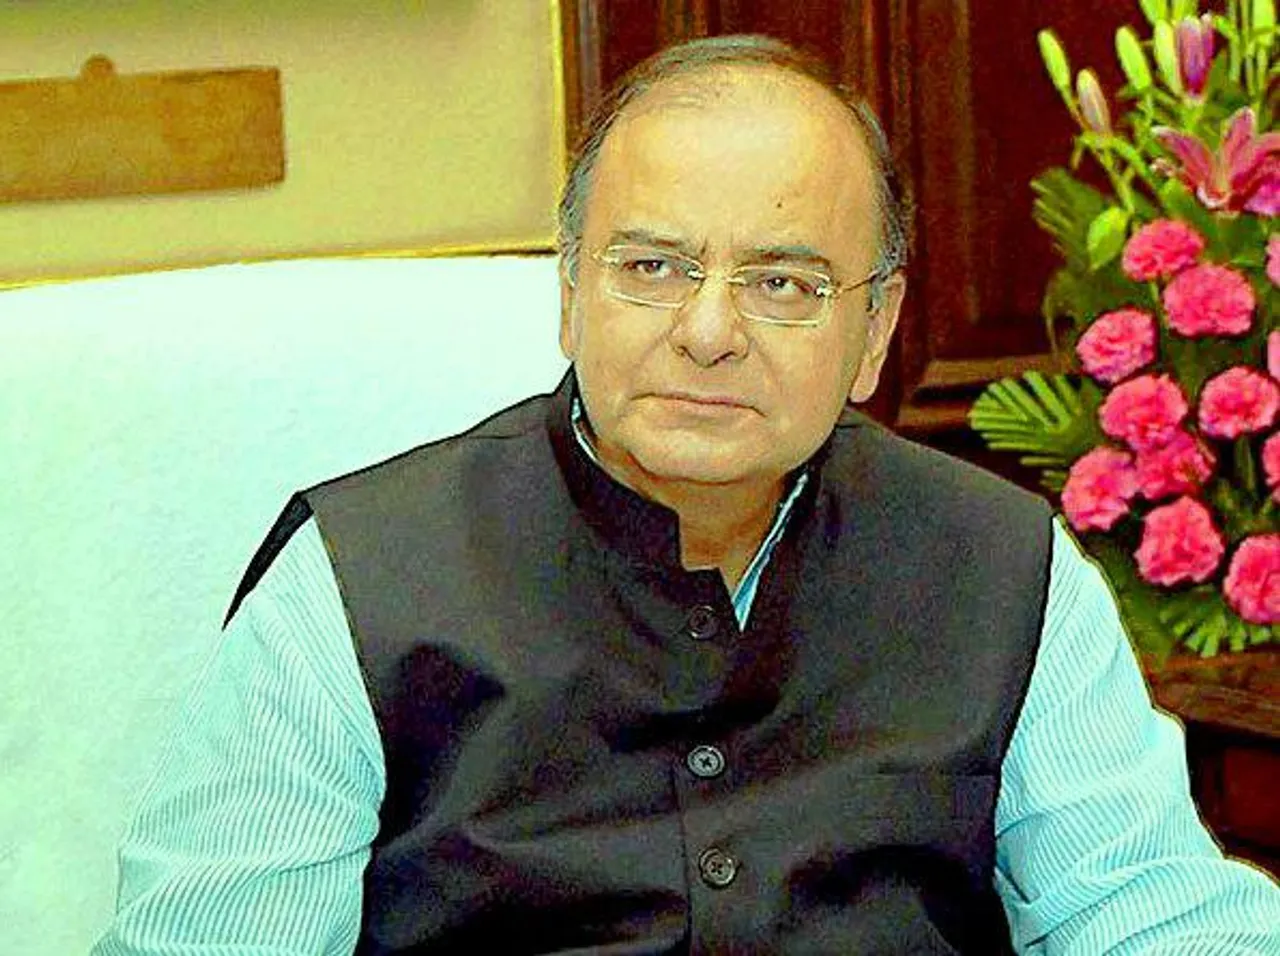 The Journey of Economic Reforms has Started: Jaitley